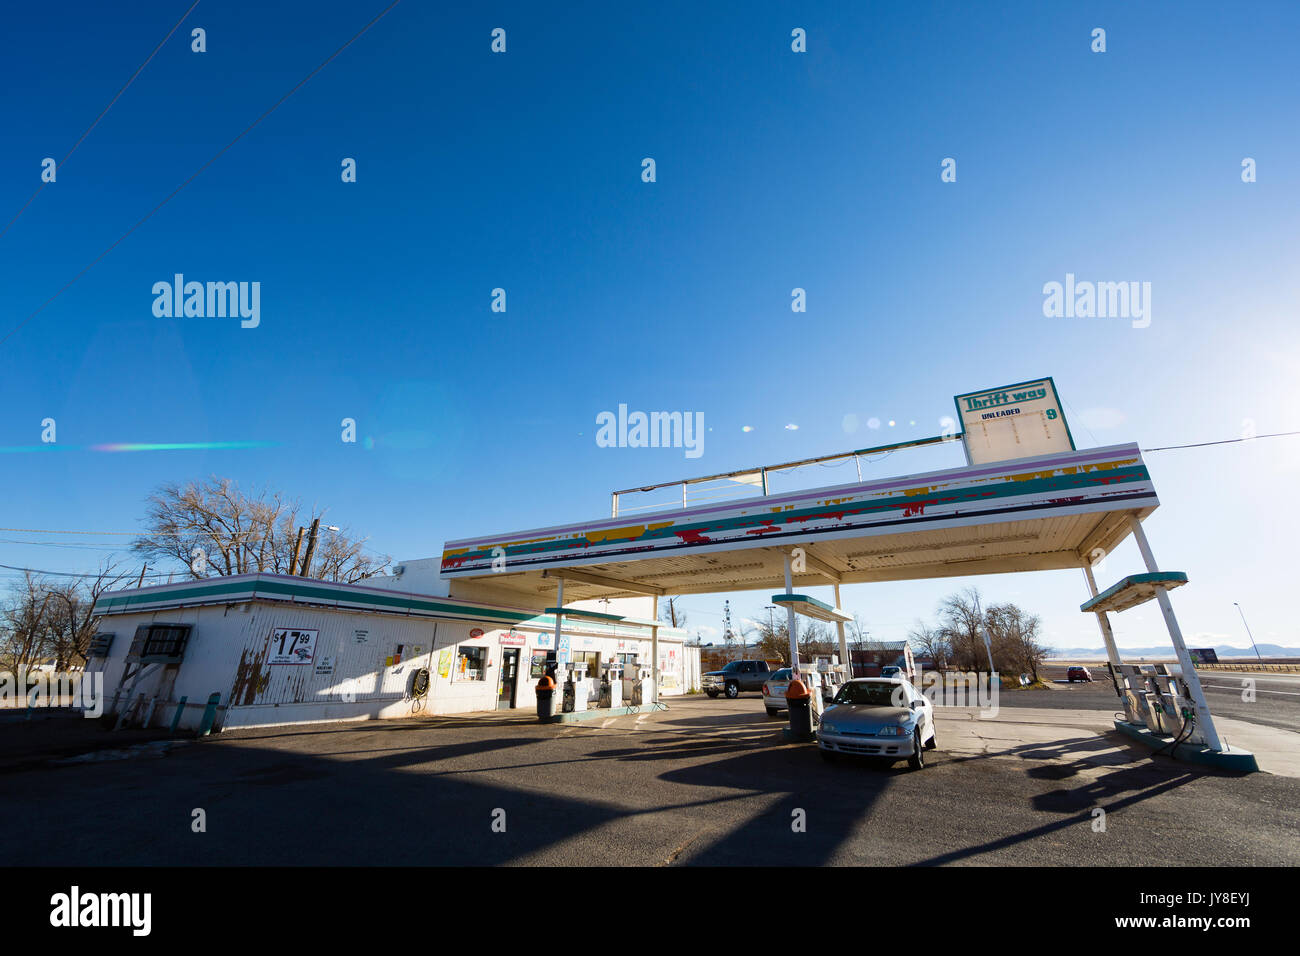 Utah, USA. A car sits under the awning of a gas station in the desert. Stock Photo